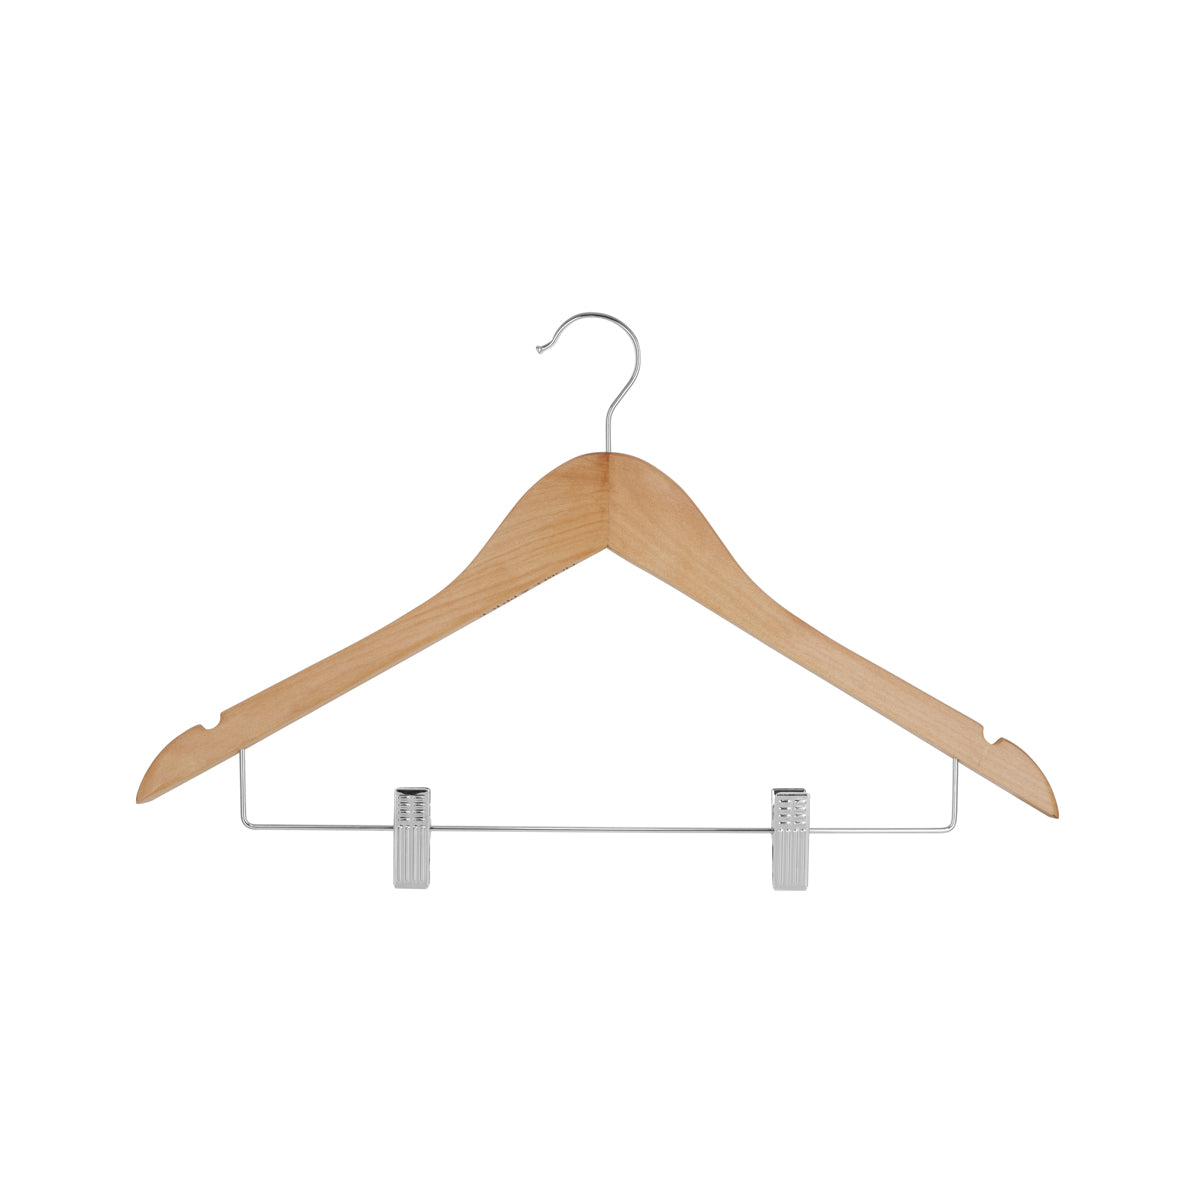 9000-23 Noble & Price Hanger Standard with Hook & Clips Birch 445x250x12mm Tomkin Australia Hospitality Supplies